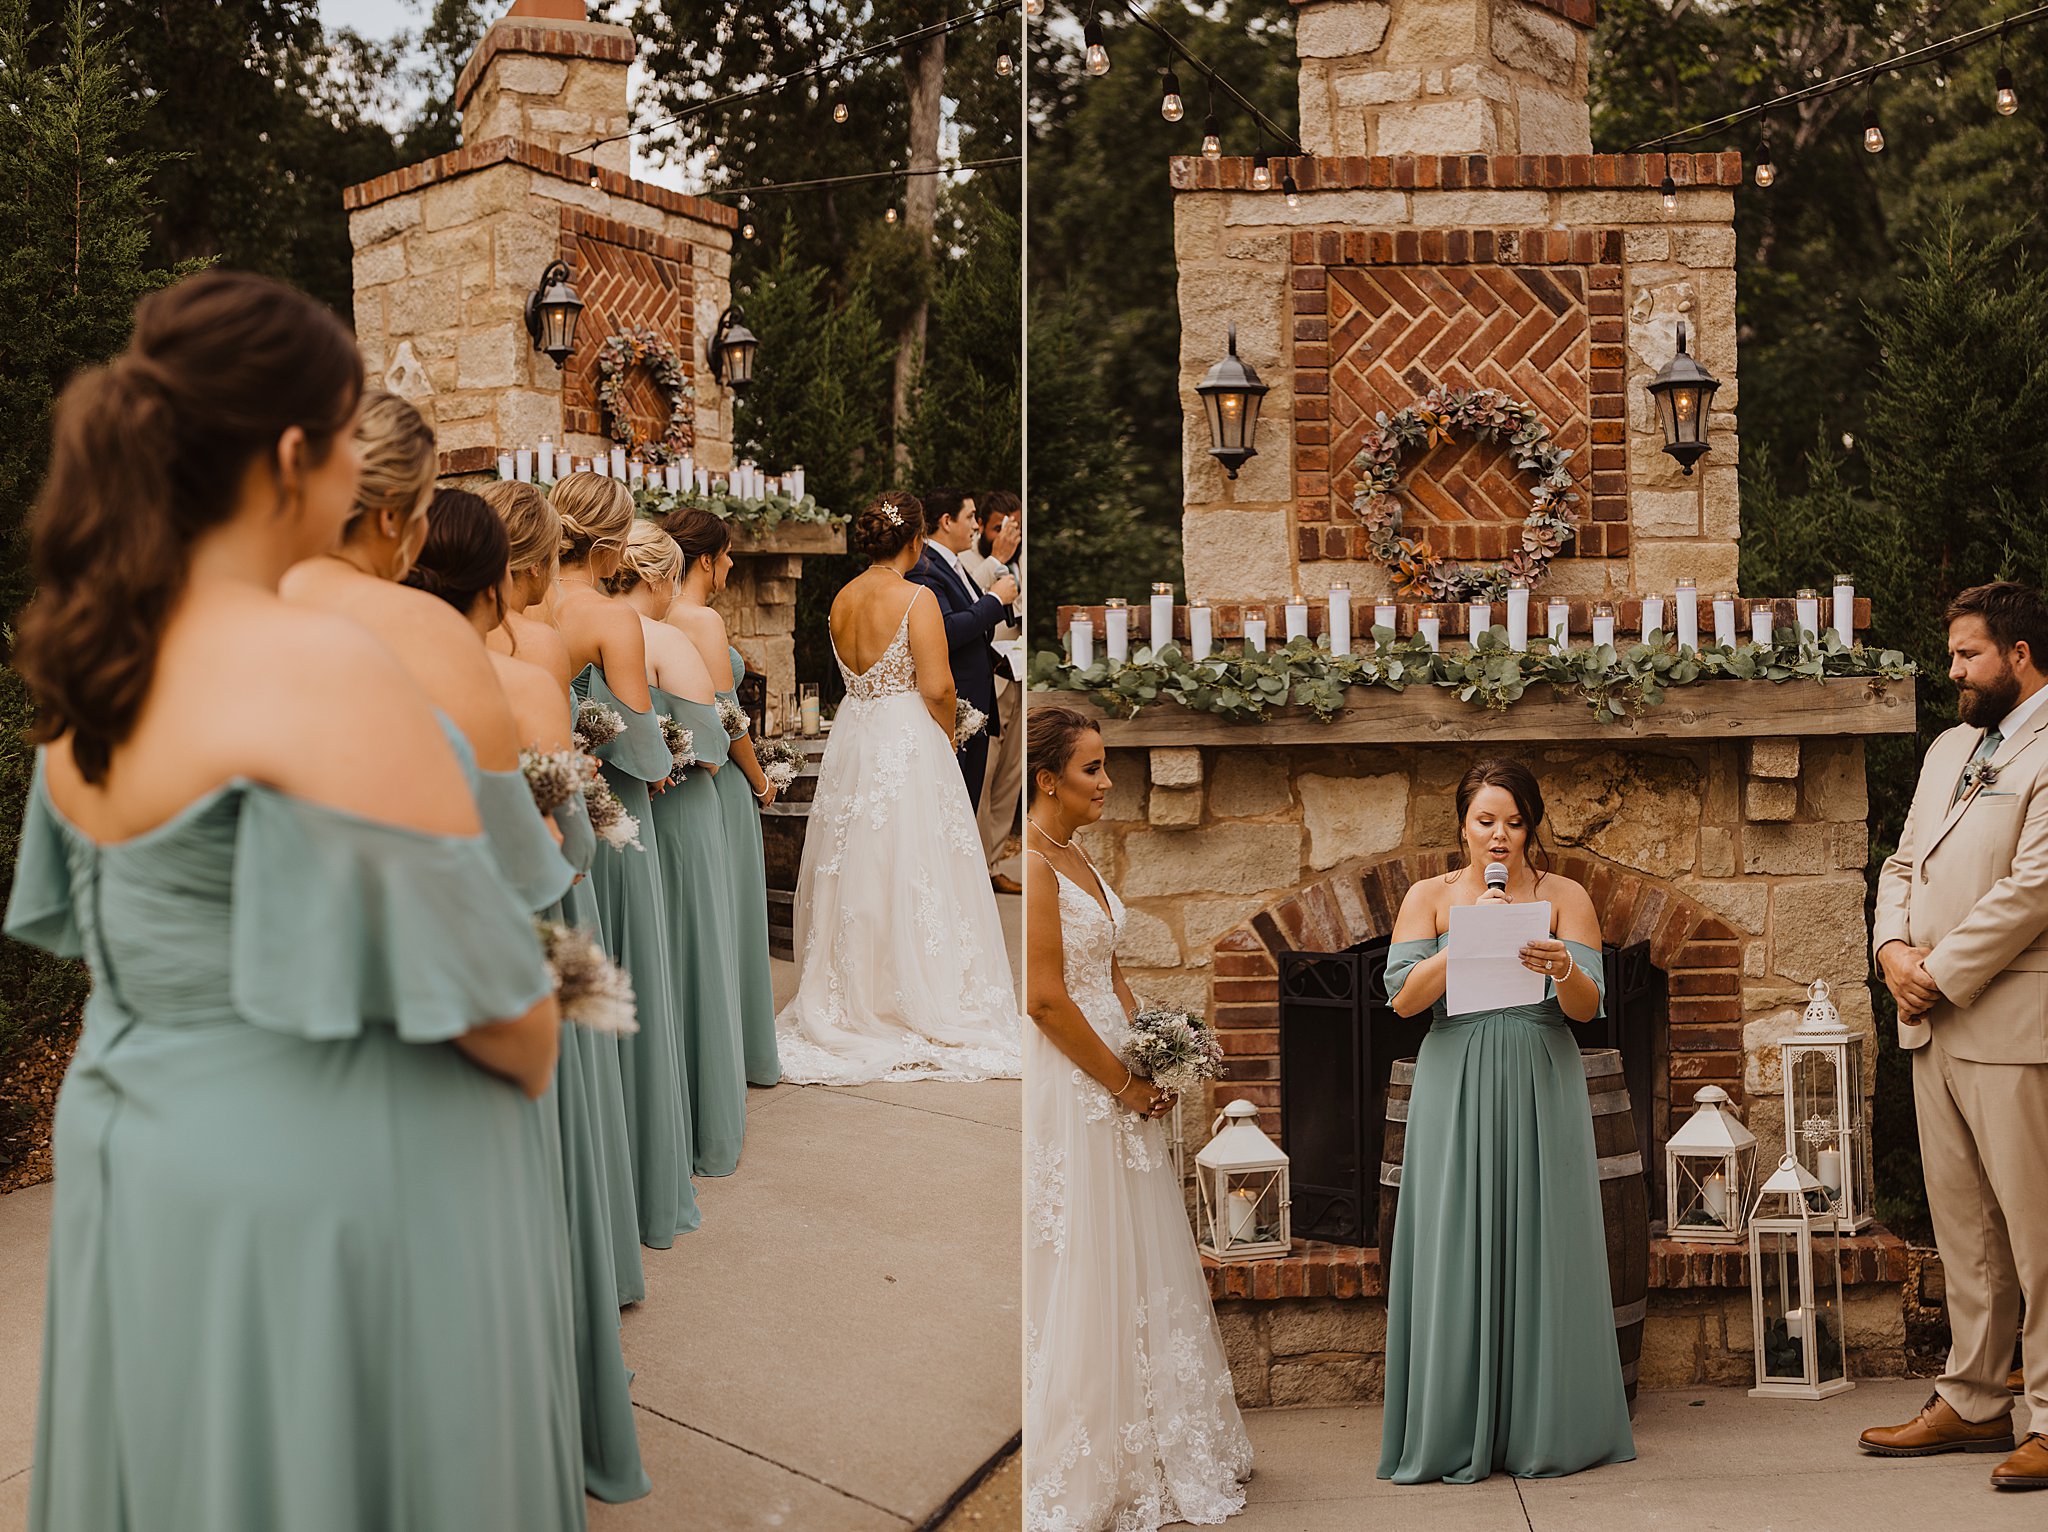 Silver Oaks Chateau Outdoor Wedding Ceremony